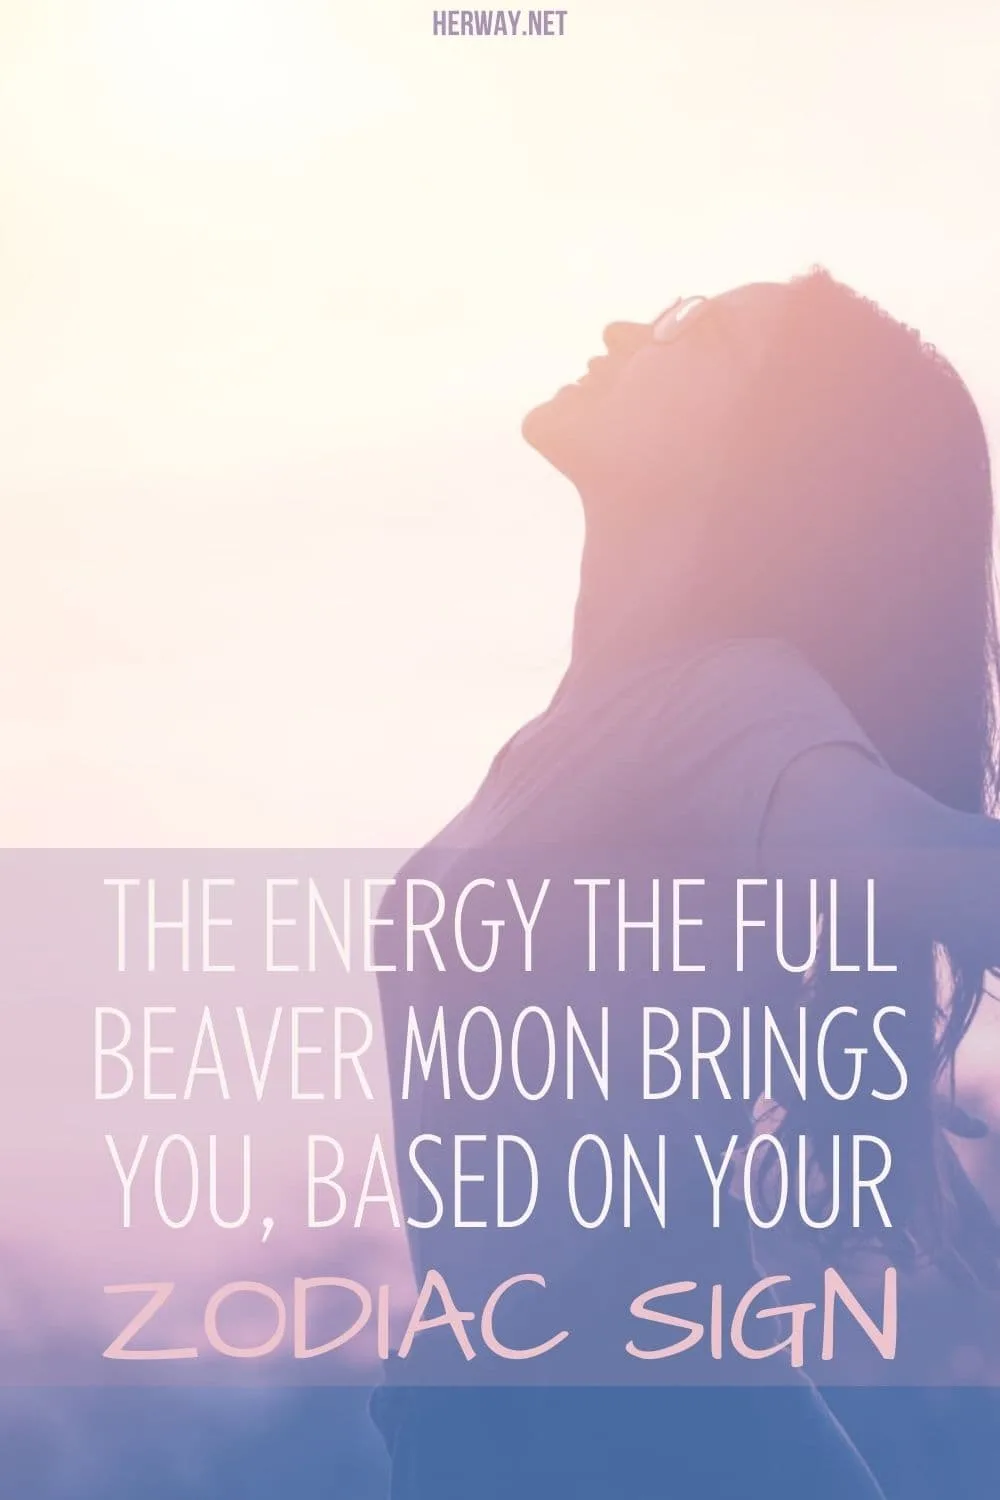 The Energy The Full Beaver Moon Brings You, Based On Your Zodiac Sign